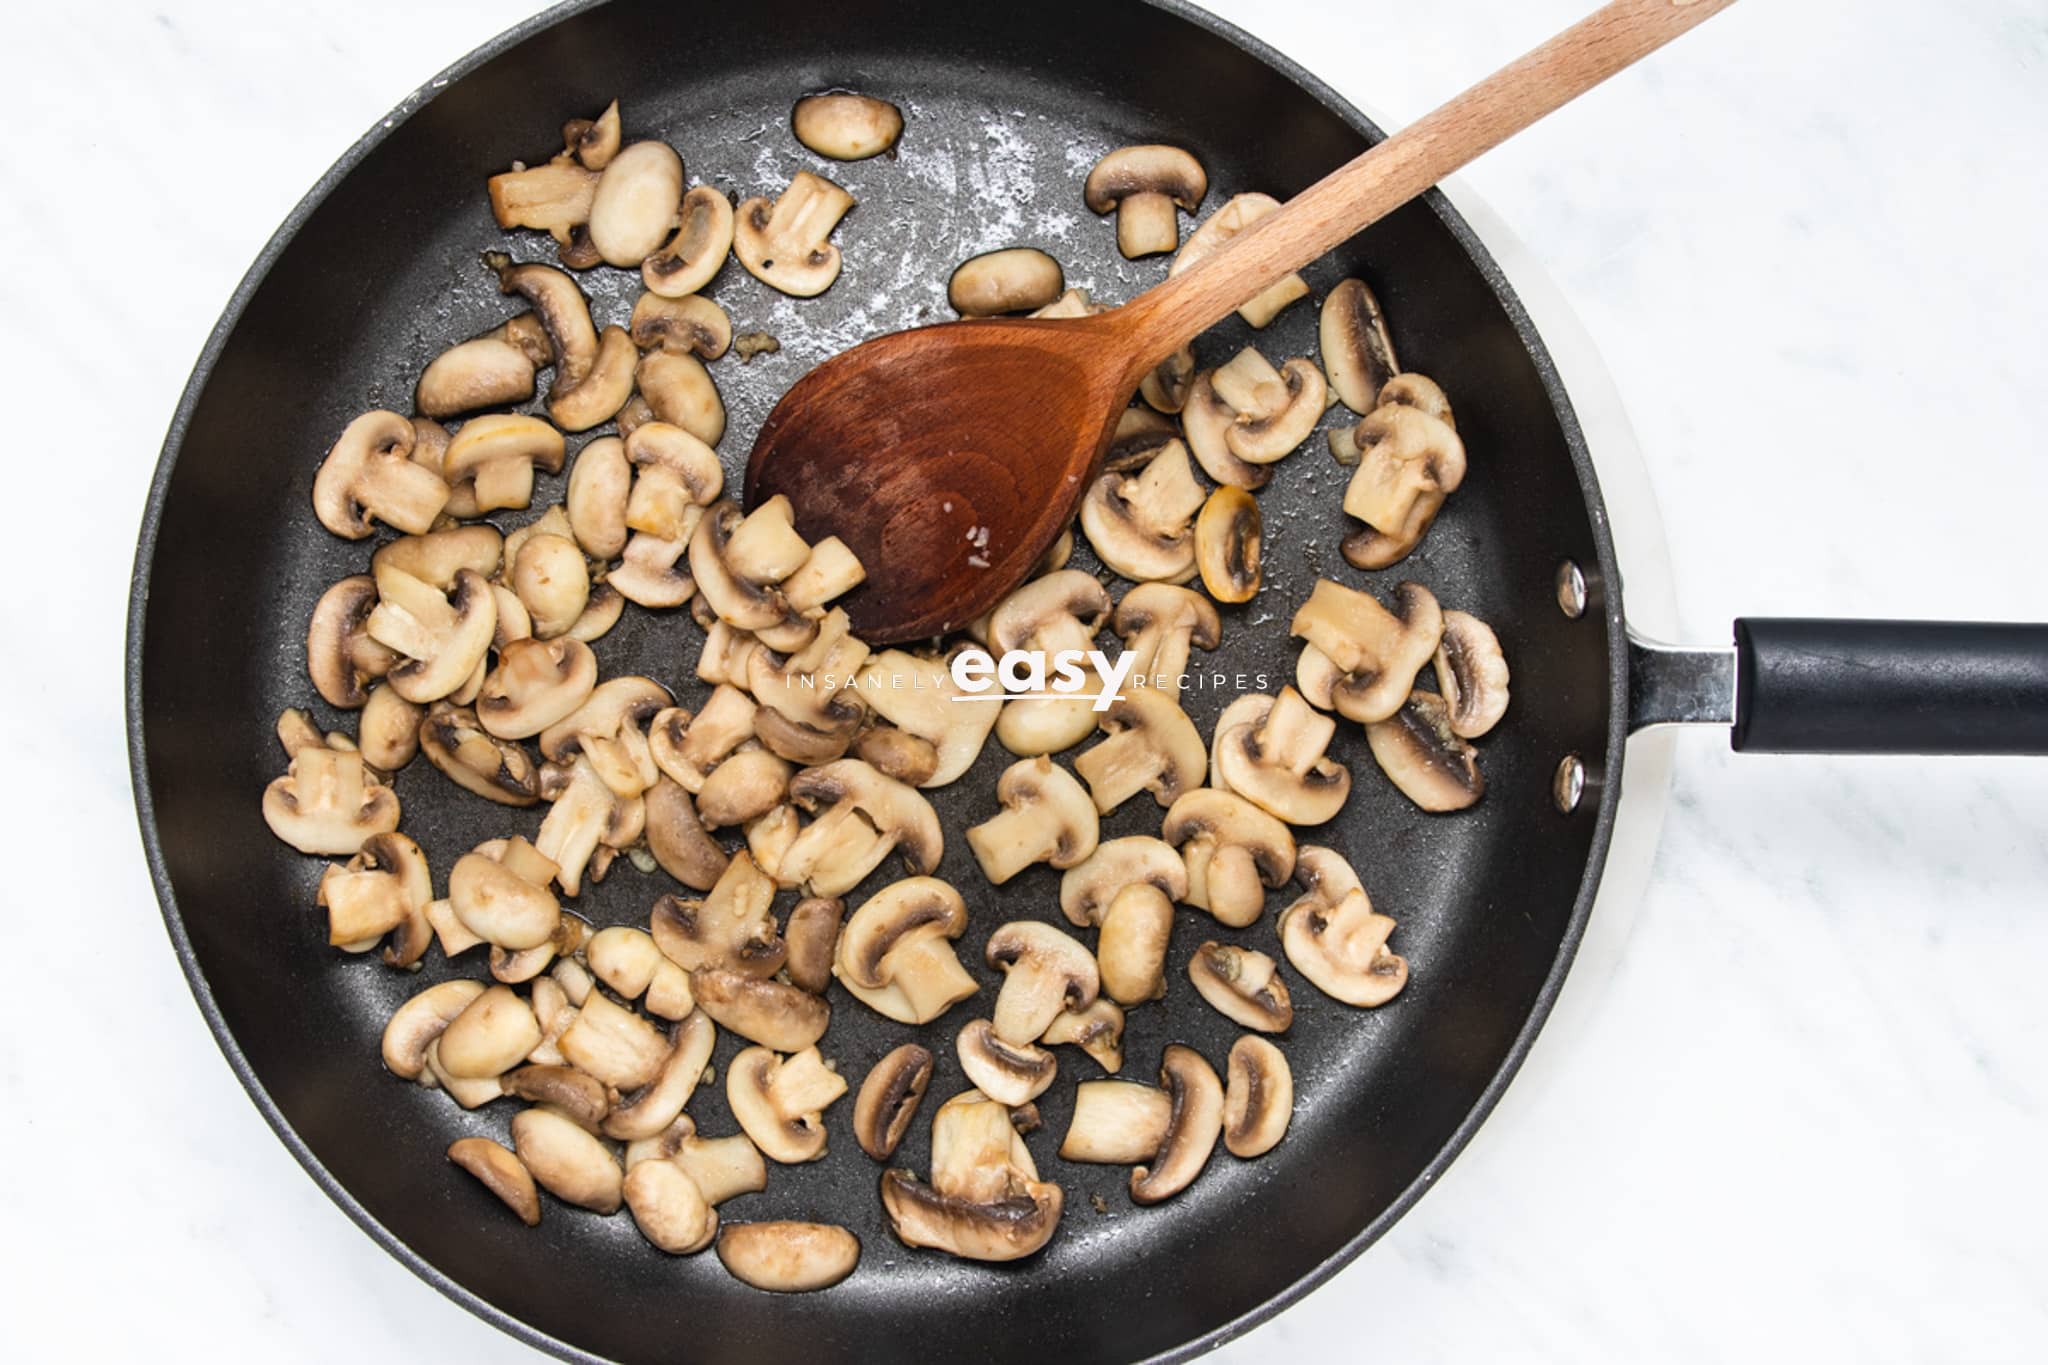 sliced mushrooms sauteed in a frying pan with a wooden spoon.